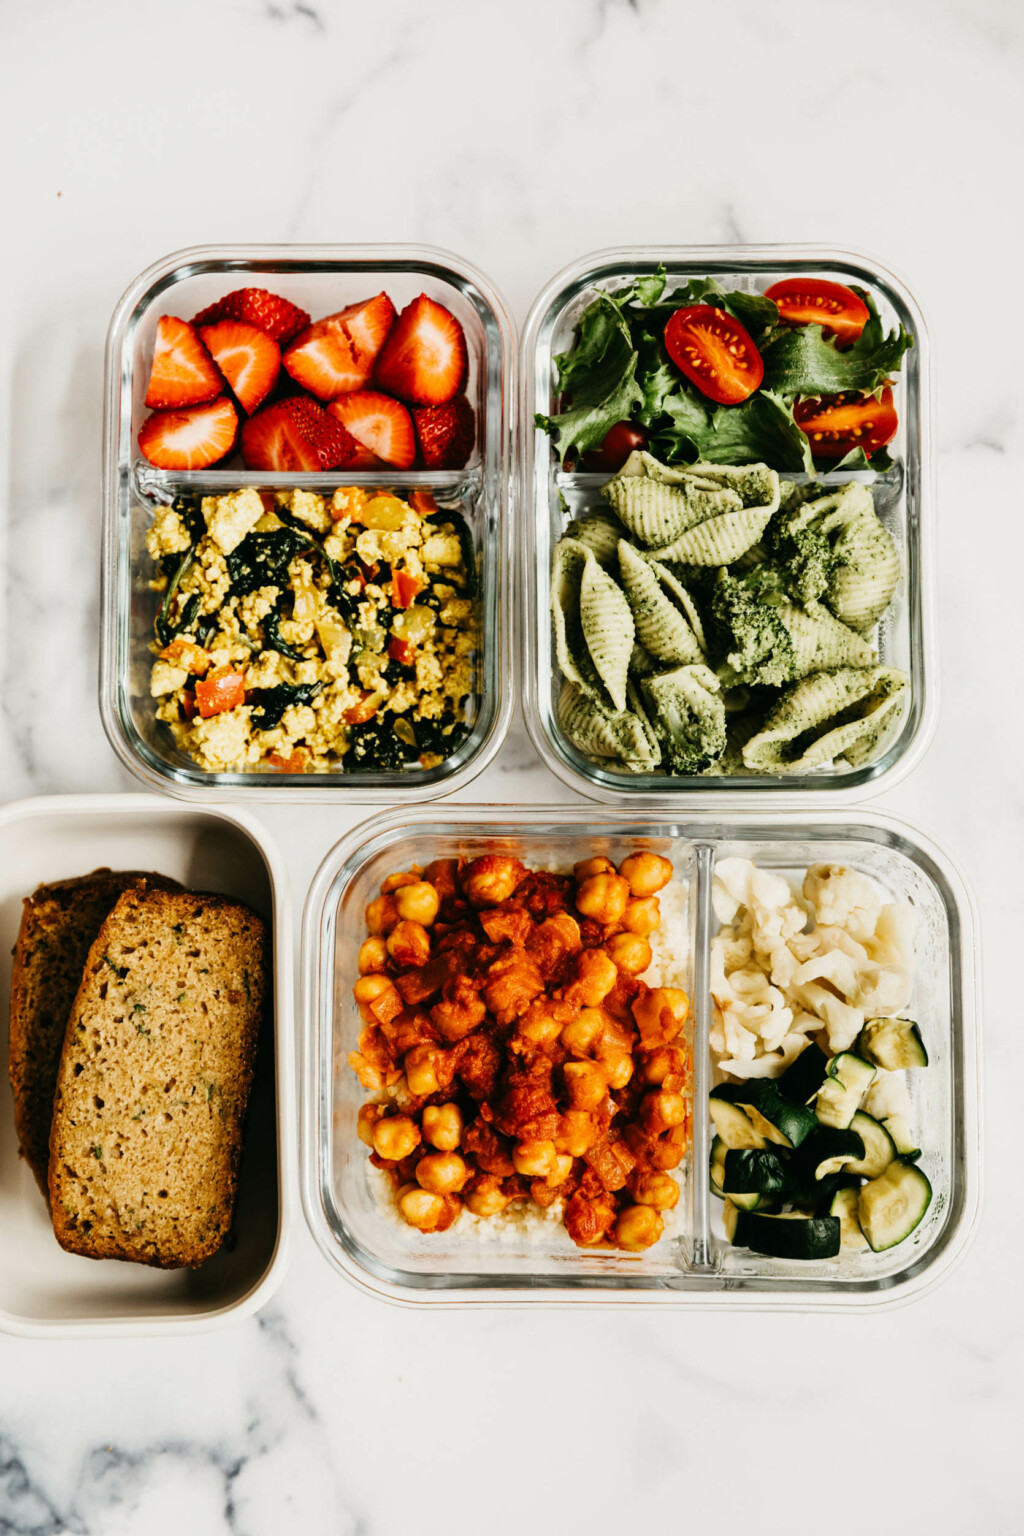 Meal Prep Freeze or Refrigerate - The Meal Prep Ninja